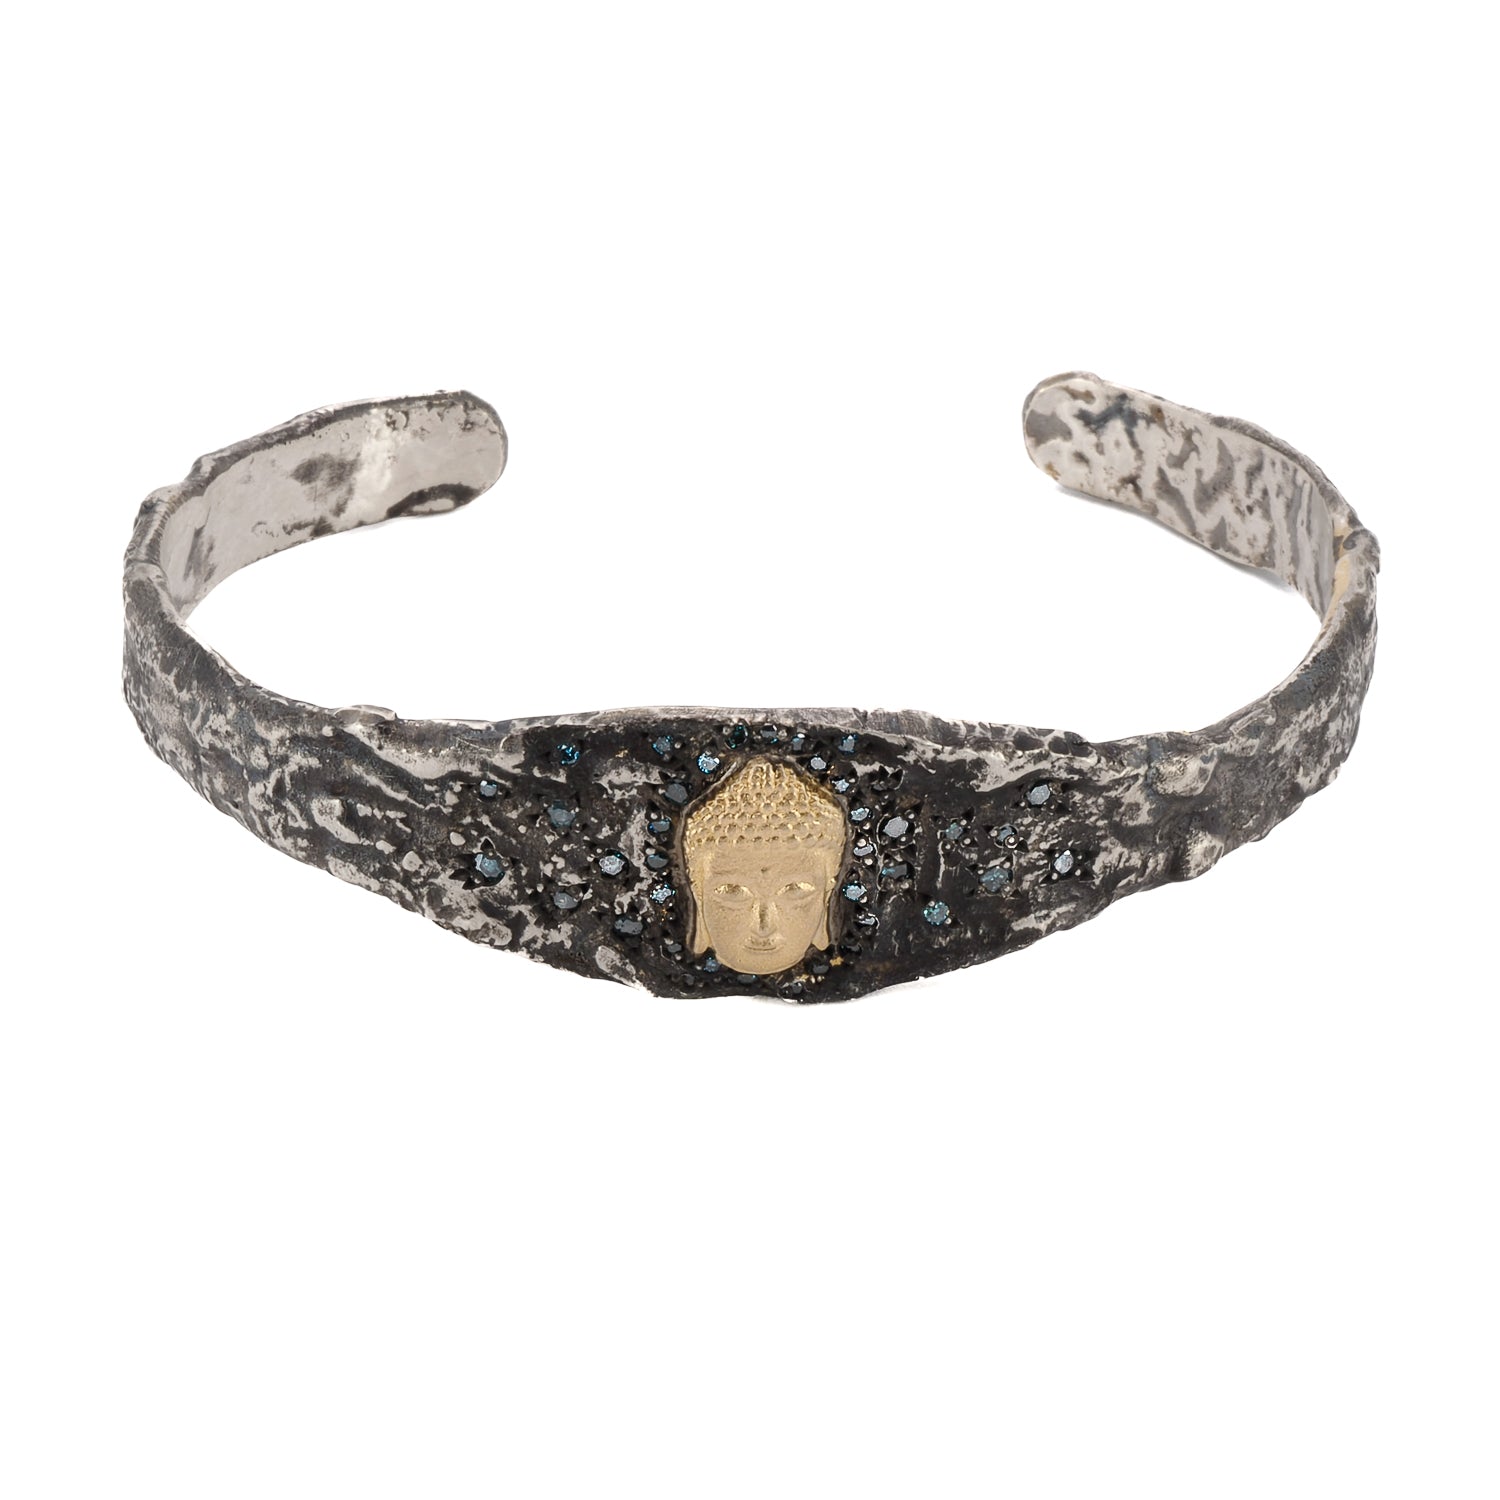 Handmade Buddha Bangle Bracelet - This exquisite bangle bracelet is meticulously handcrafted using sterling silver, 14k gold, and adorned with 0.75 carat blue diamonds, creating a luxurious and meaningful piece of jewelry.